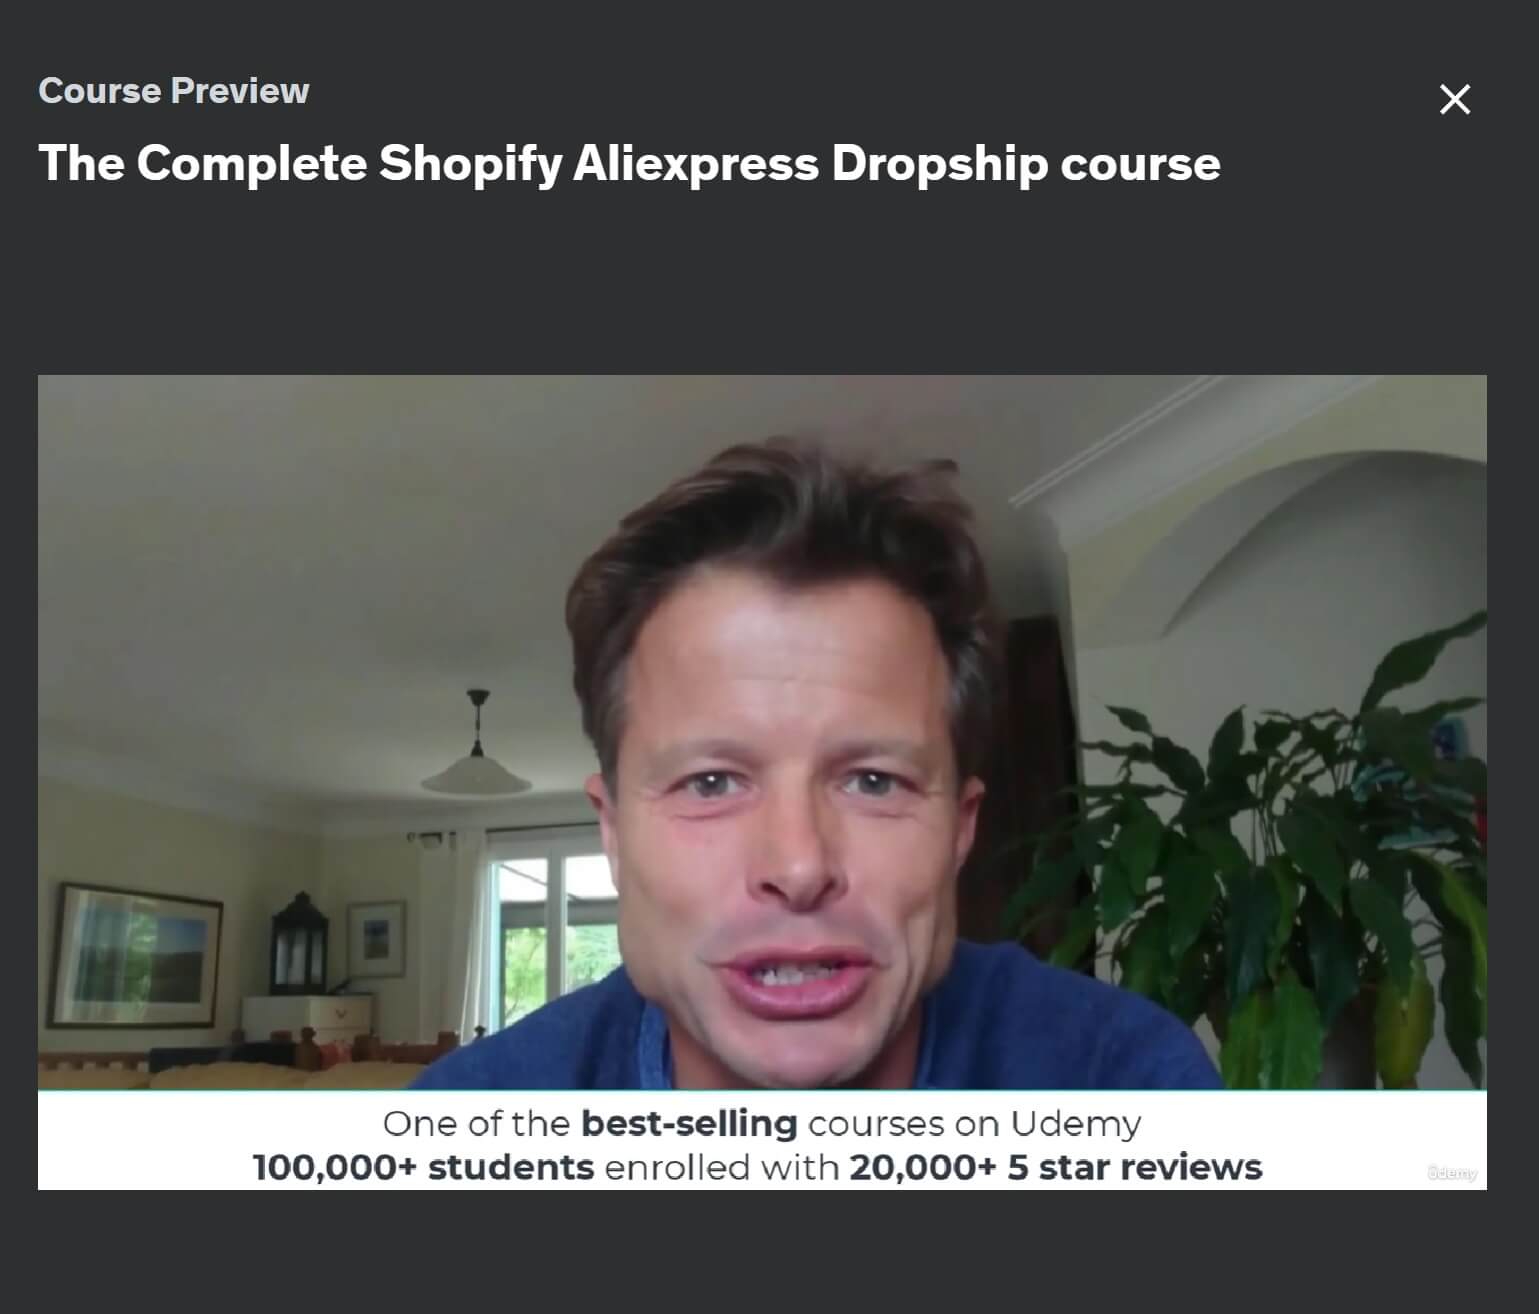 The Complete Shopify Aliexpress Dropship course preview